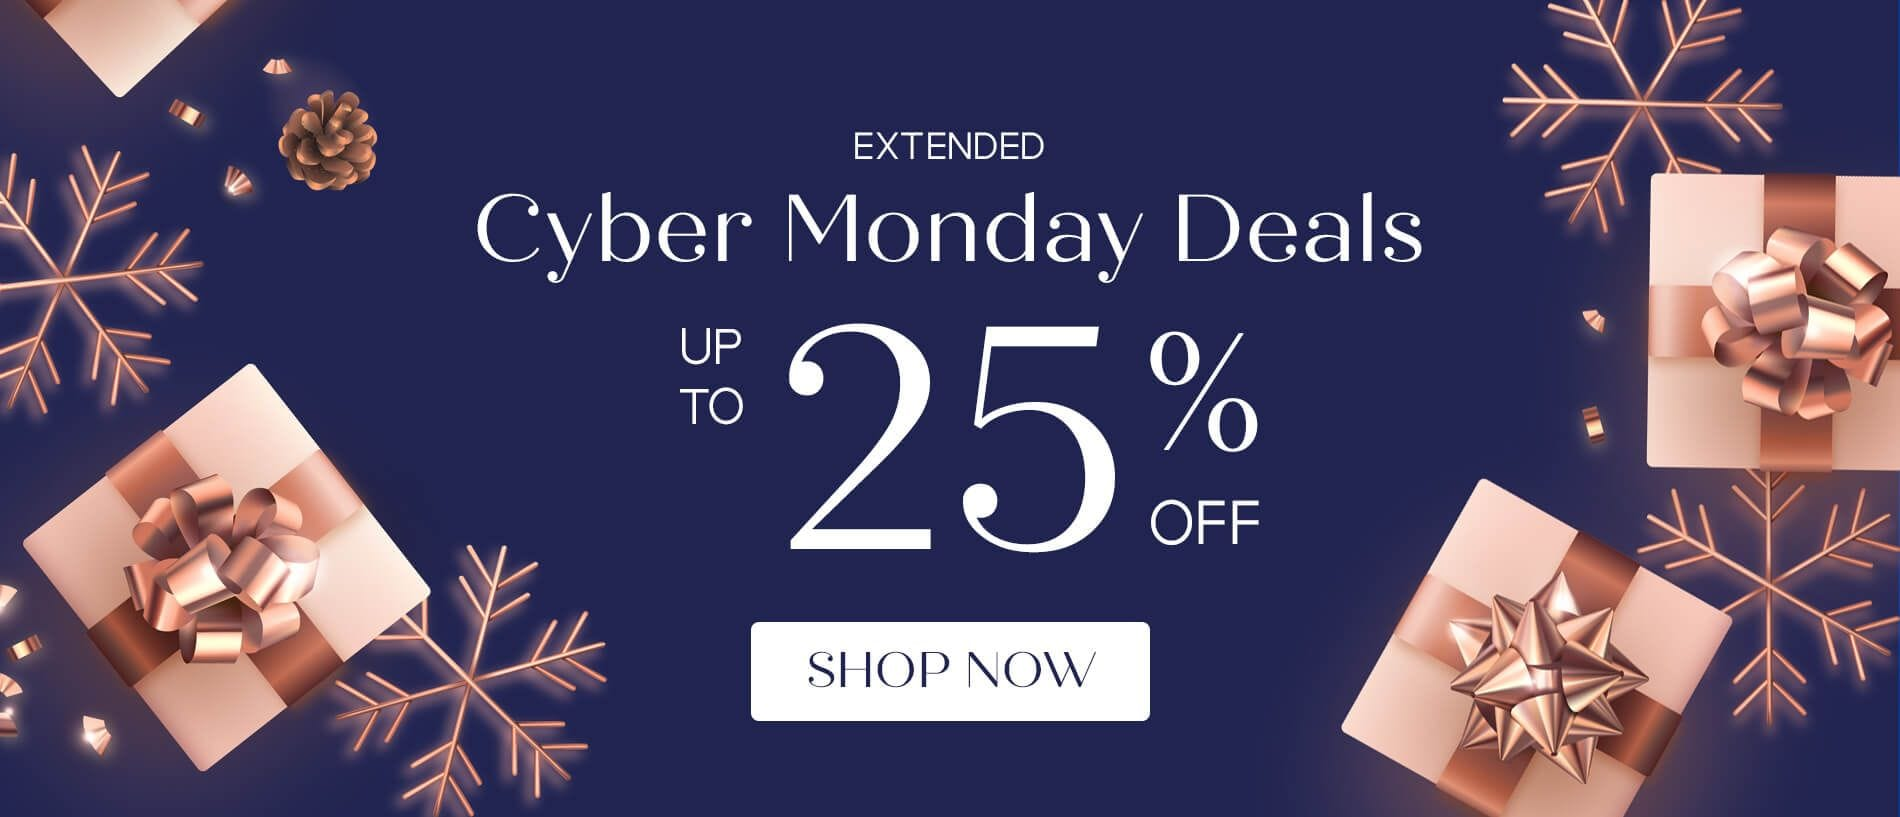 extended cyber monday deals